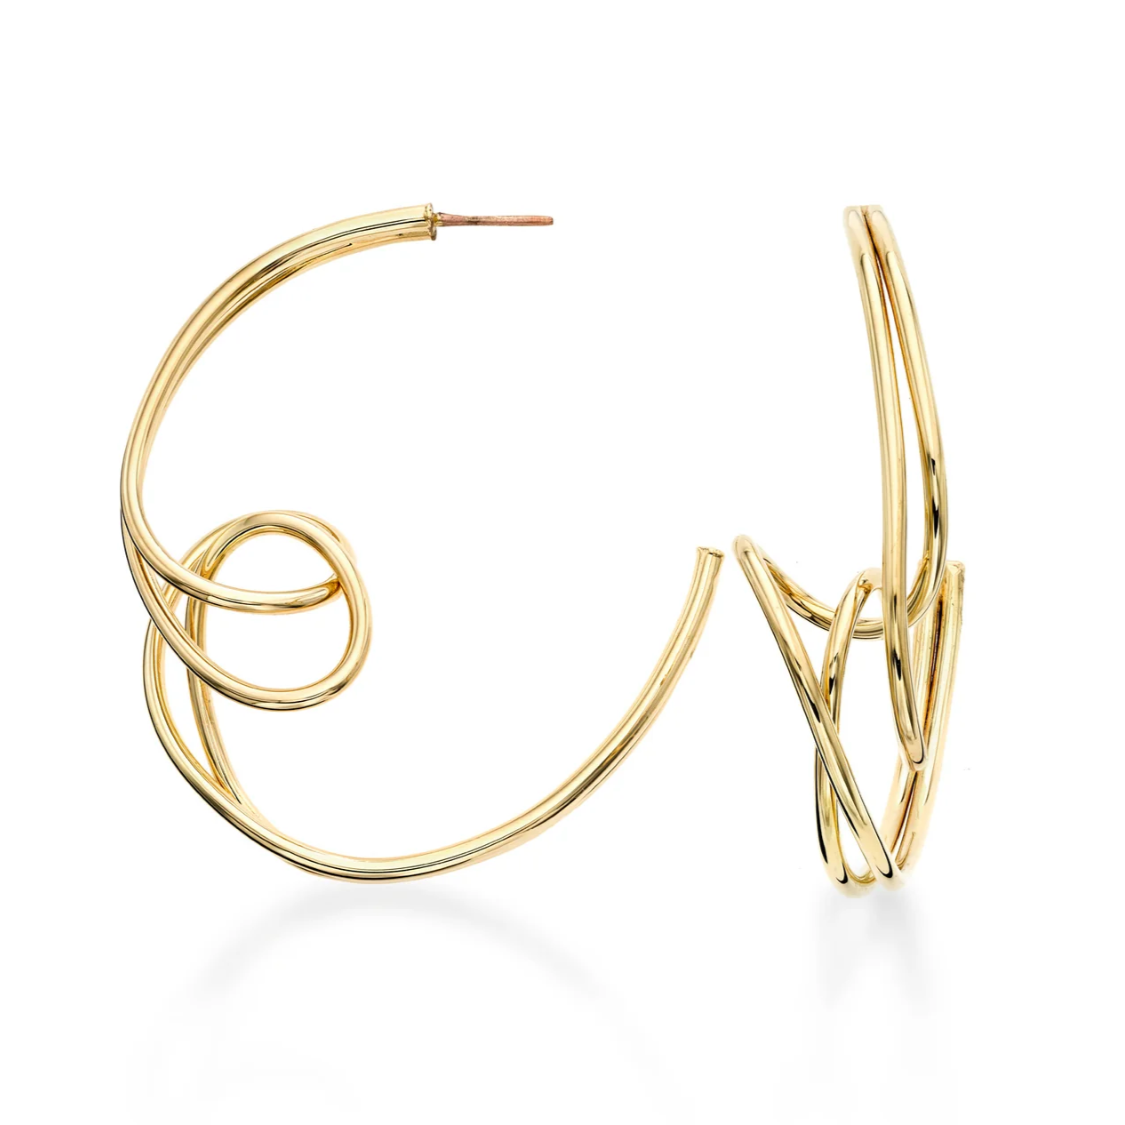 a side and front view of the sculptural gold hoop mademoiselle earrings on a white background